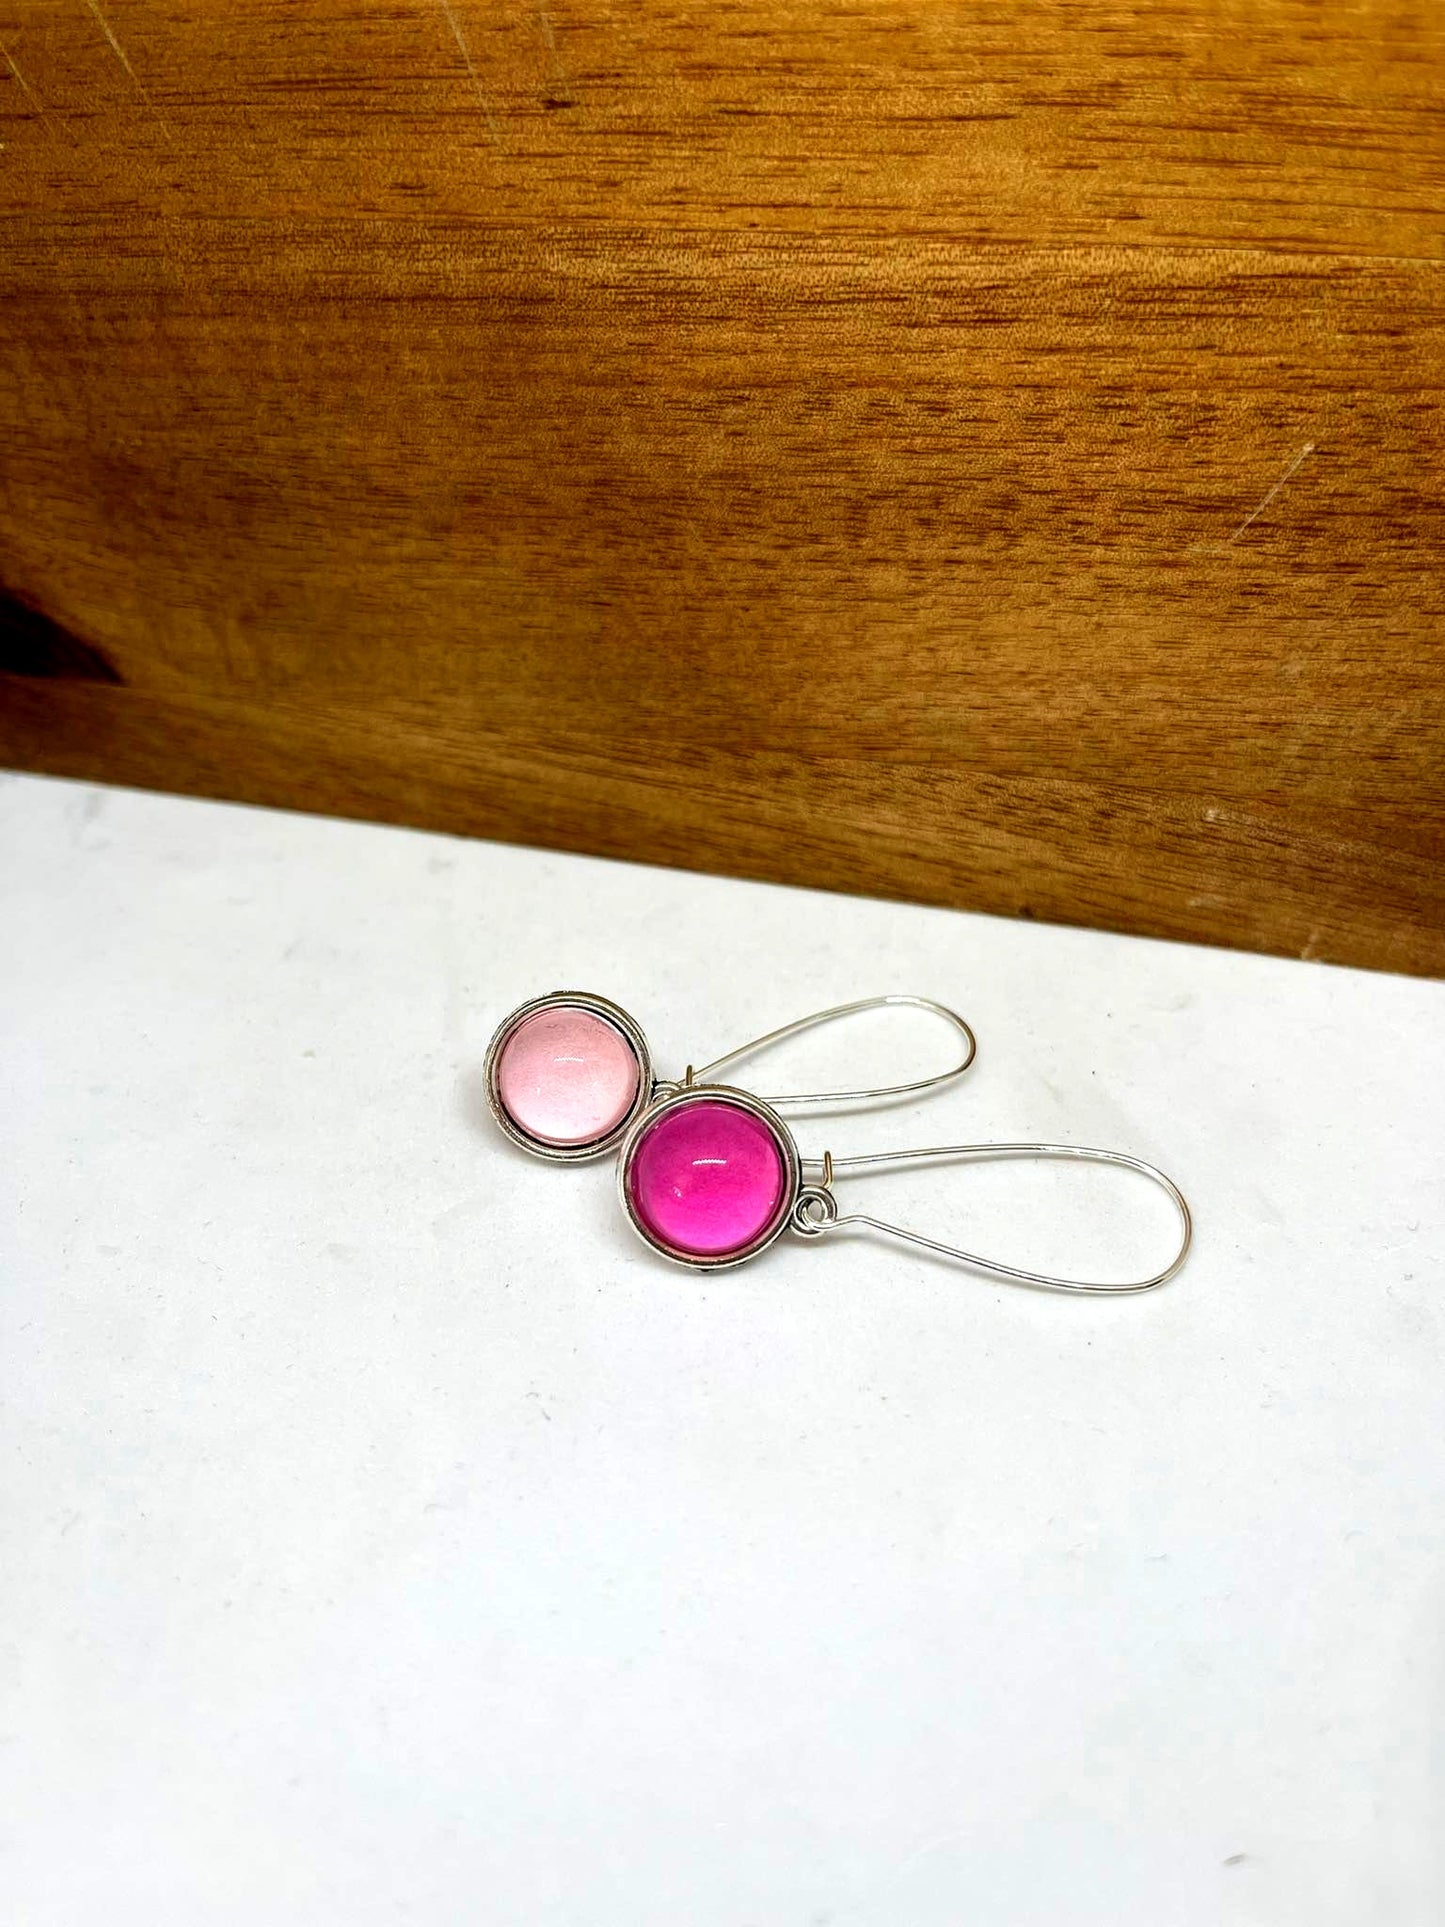 Double sided glass dome earrings with bold pink and pastel other side